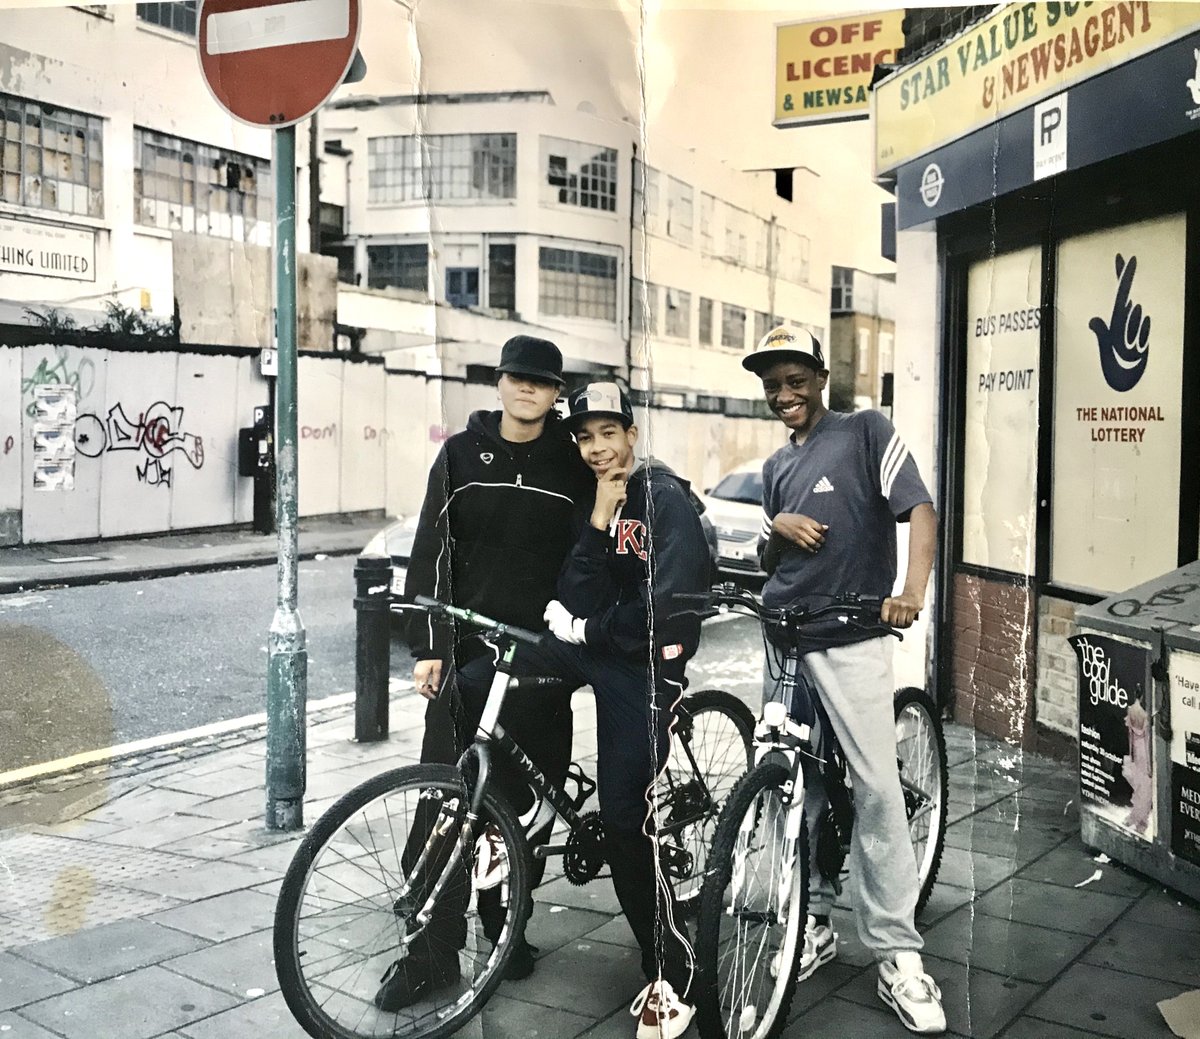 Yesterday I took some pictures in my old area of South Hackney (especially Kingshold Estate) as part of my research into  #Hackney post-war estates. Here's me and my friends on the corner of Well Street back in 2003 and here's me in the same spot in 2020.